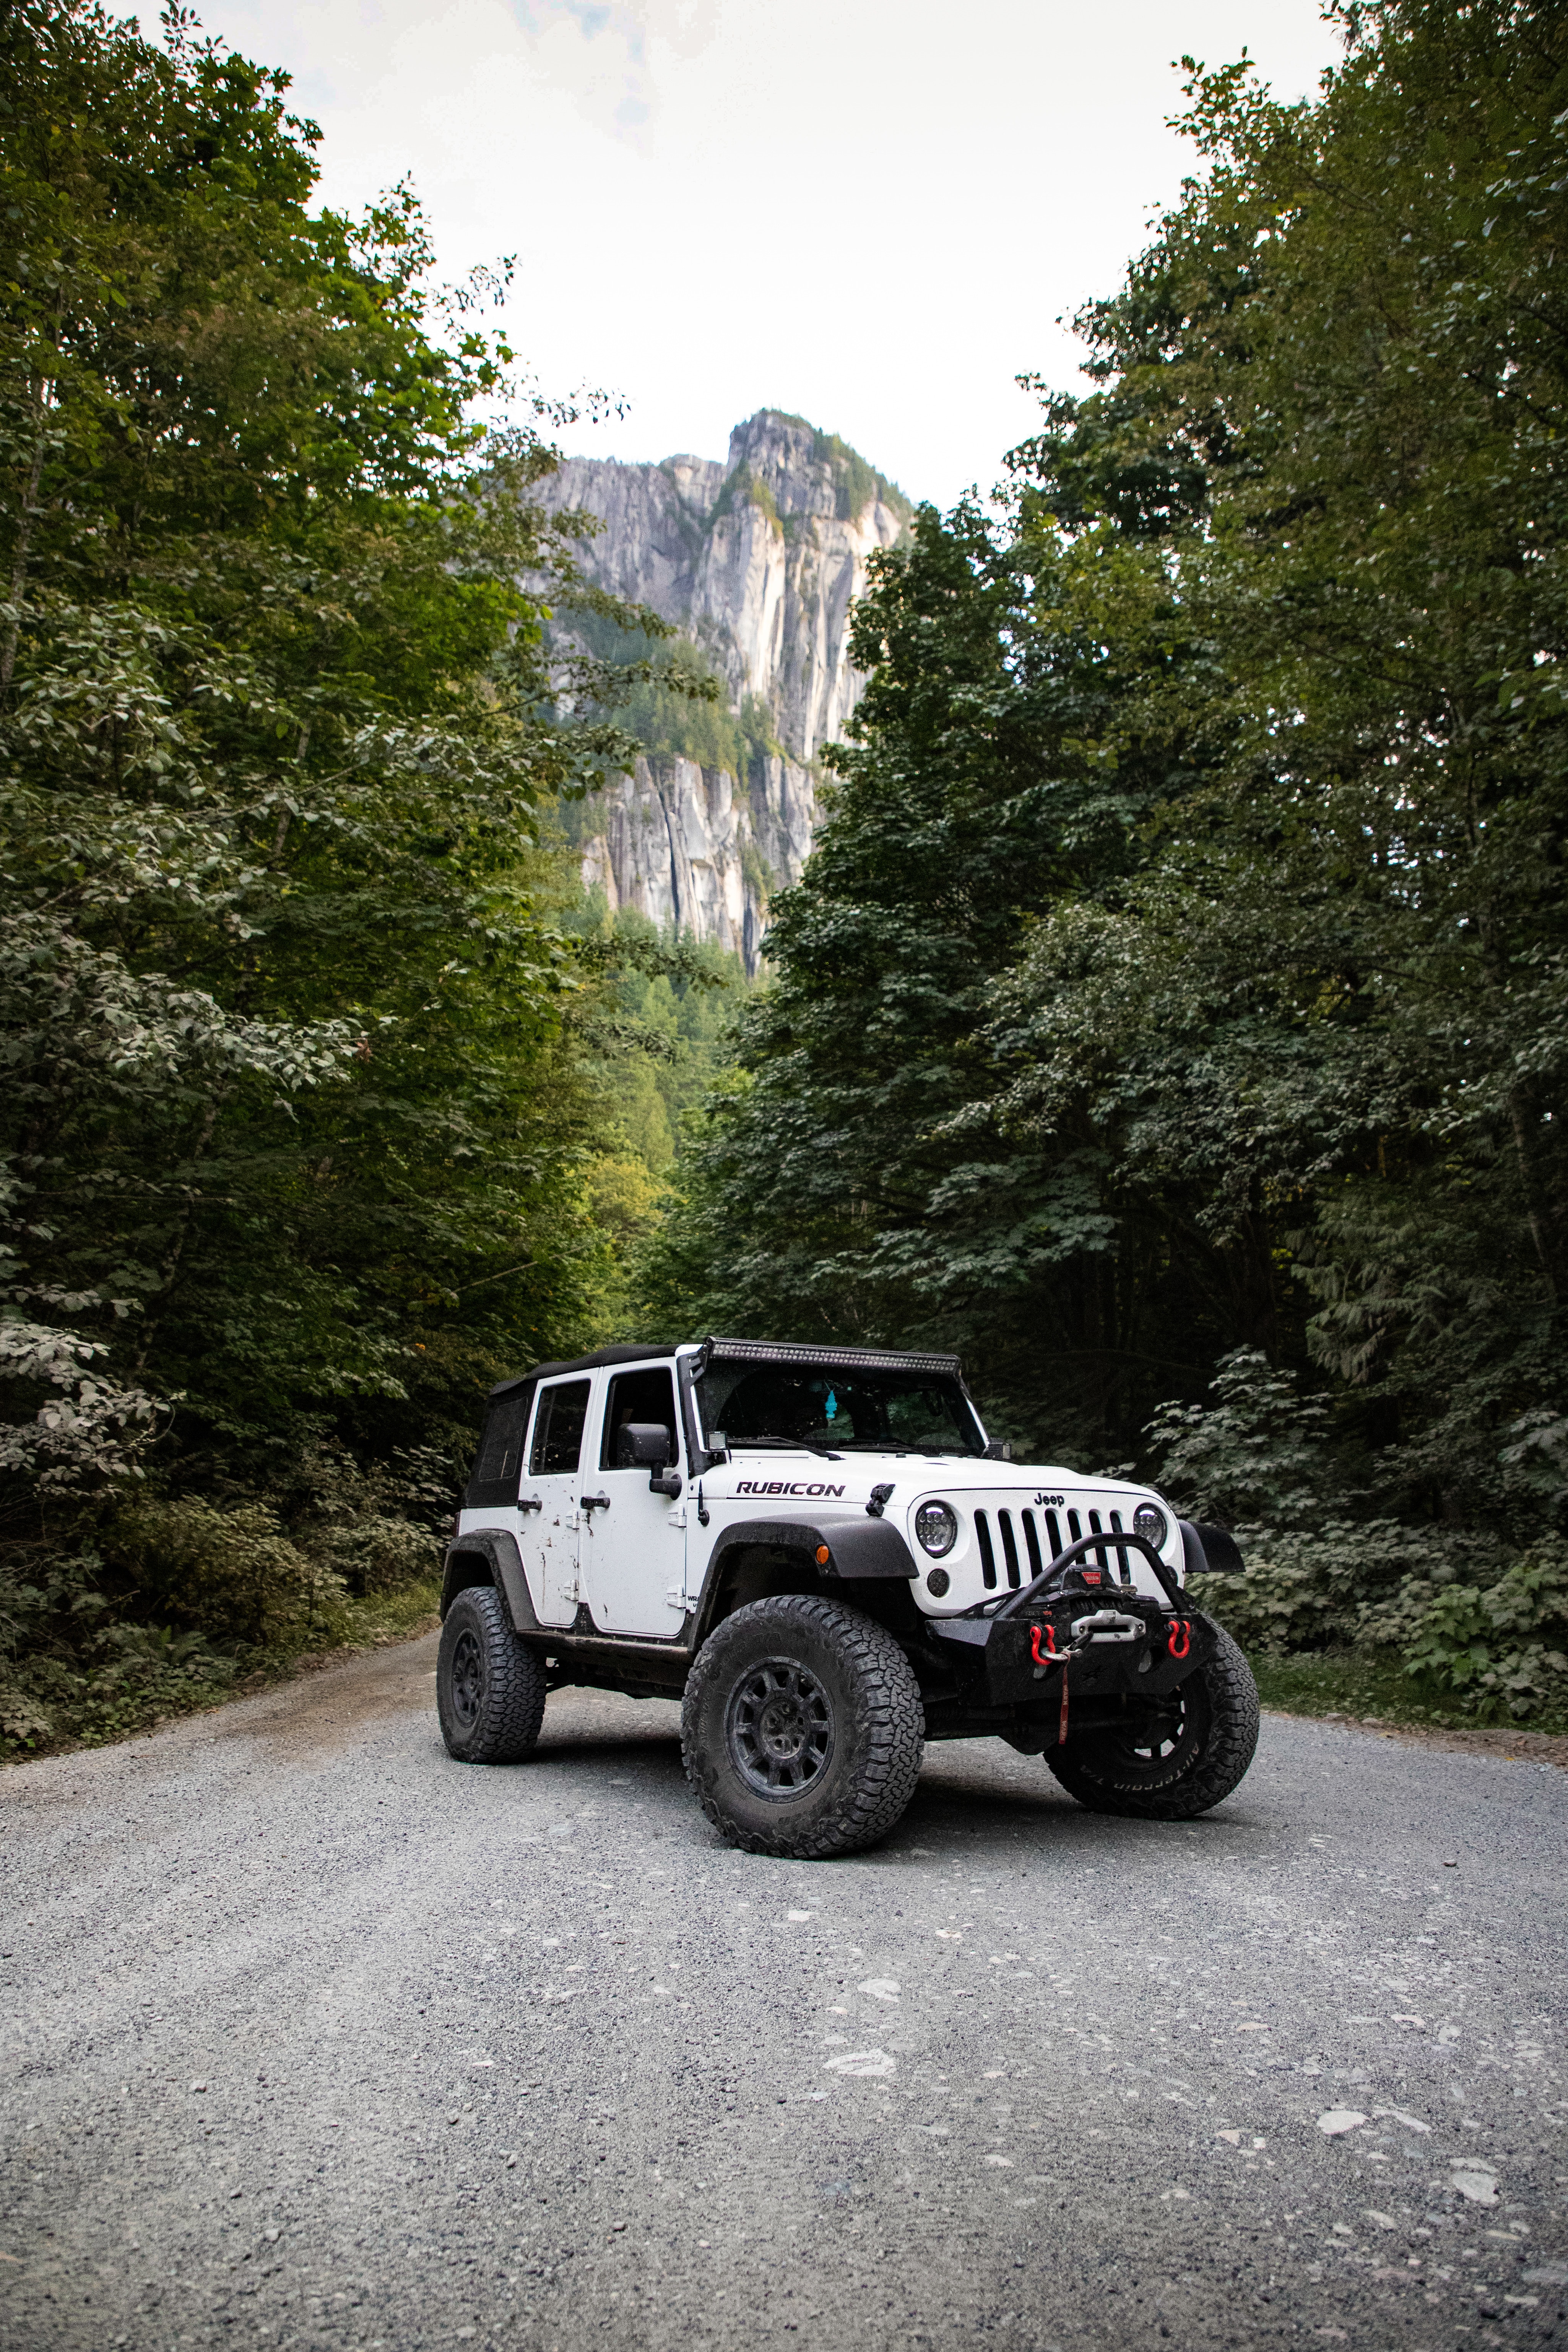 Jeep Photo, Download The BEST Free Jeep & HD Image